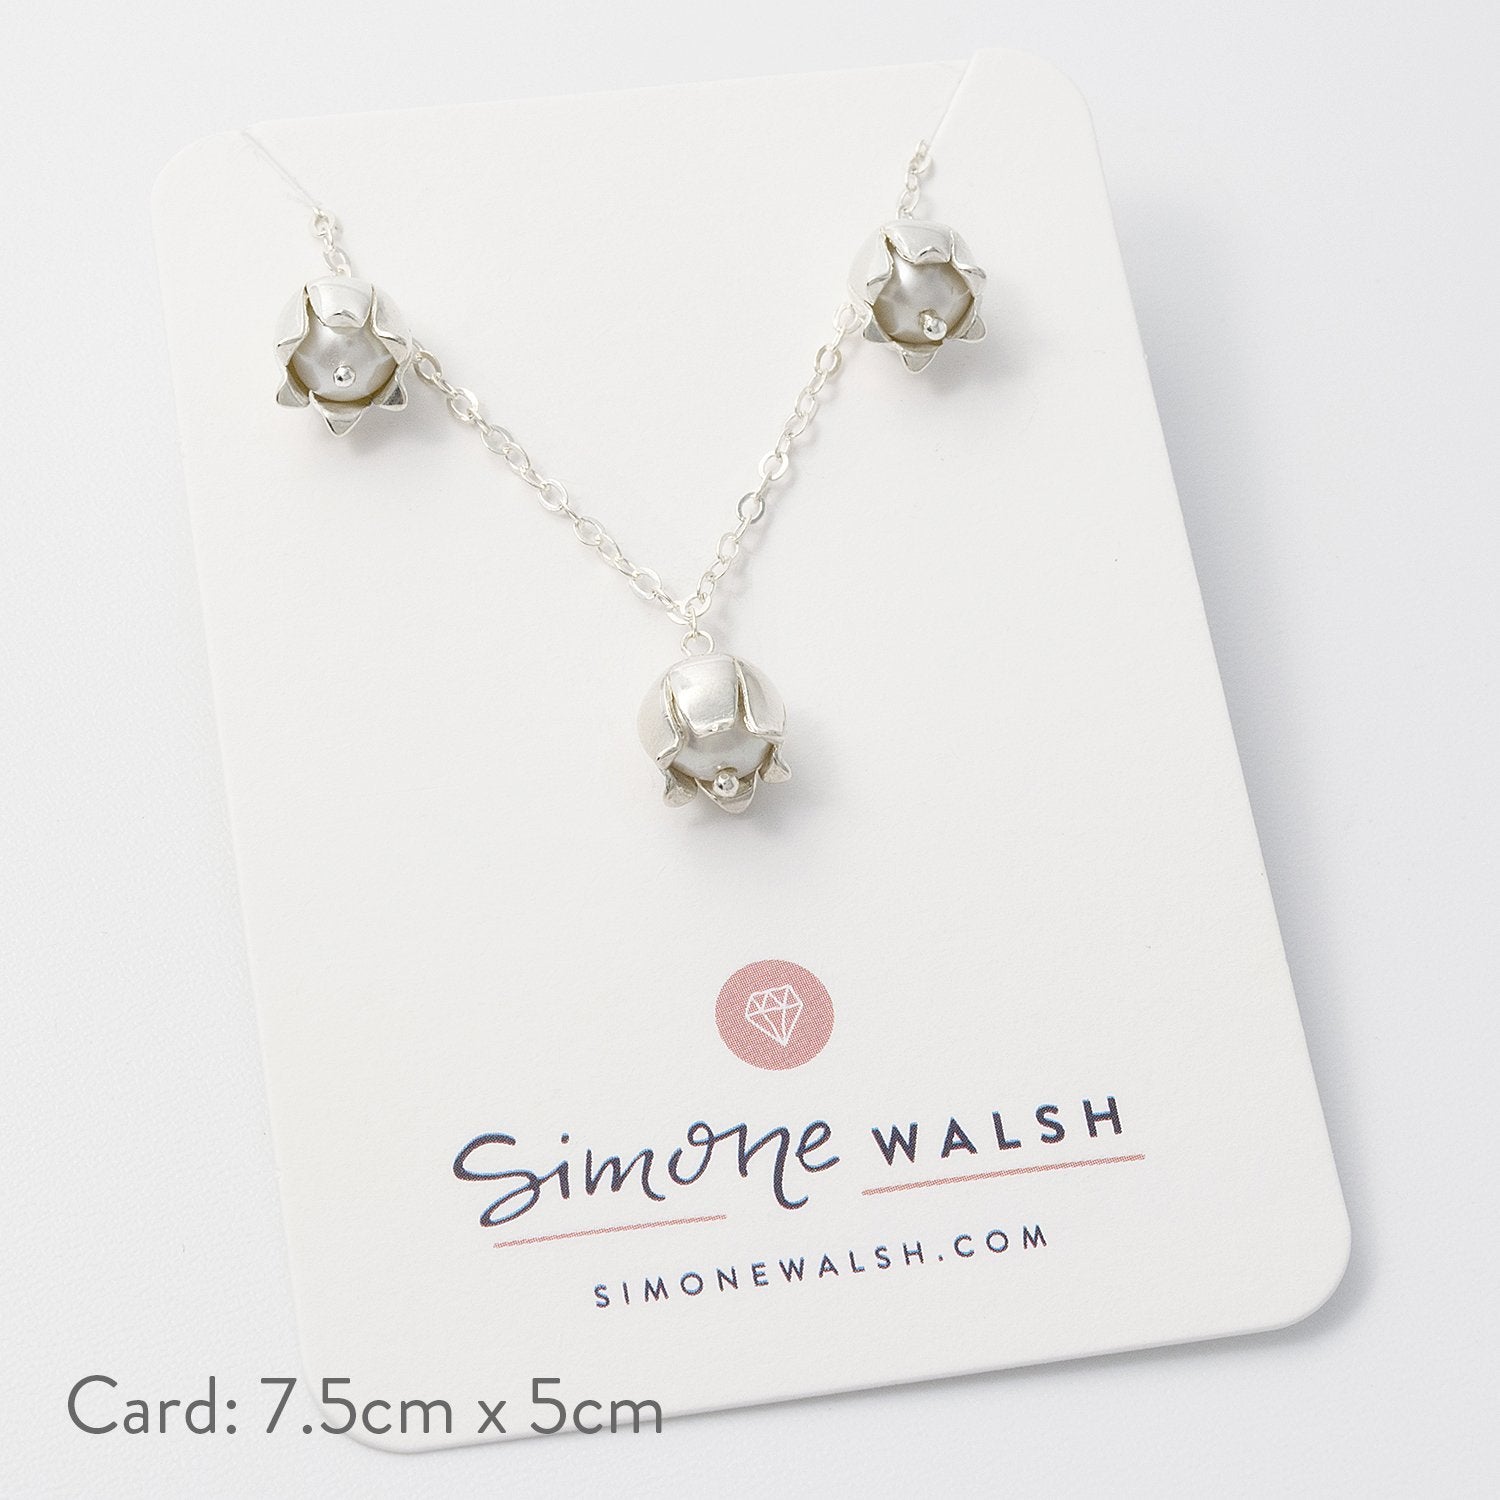 Lily of the valley necklace - Simone Walsh Jewellery Australia